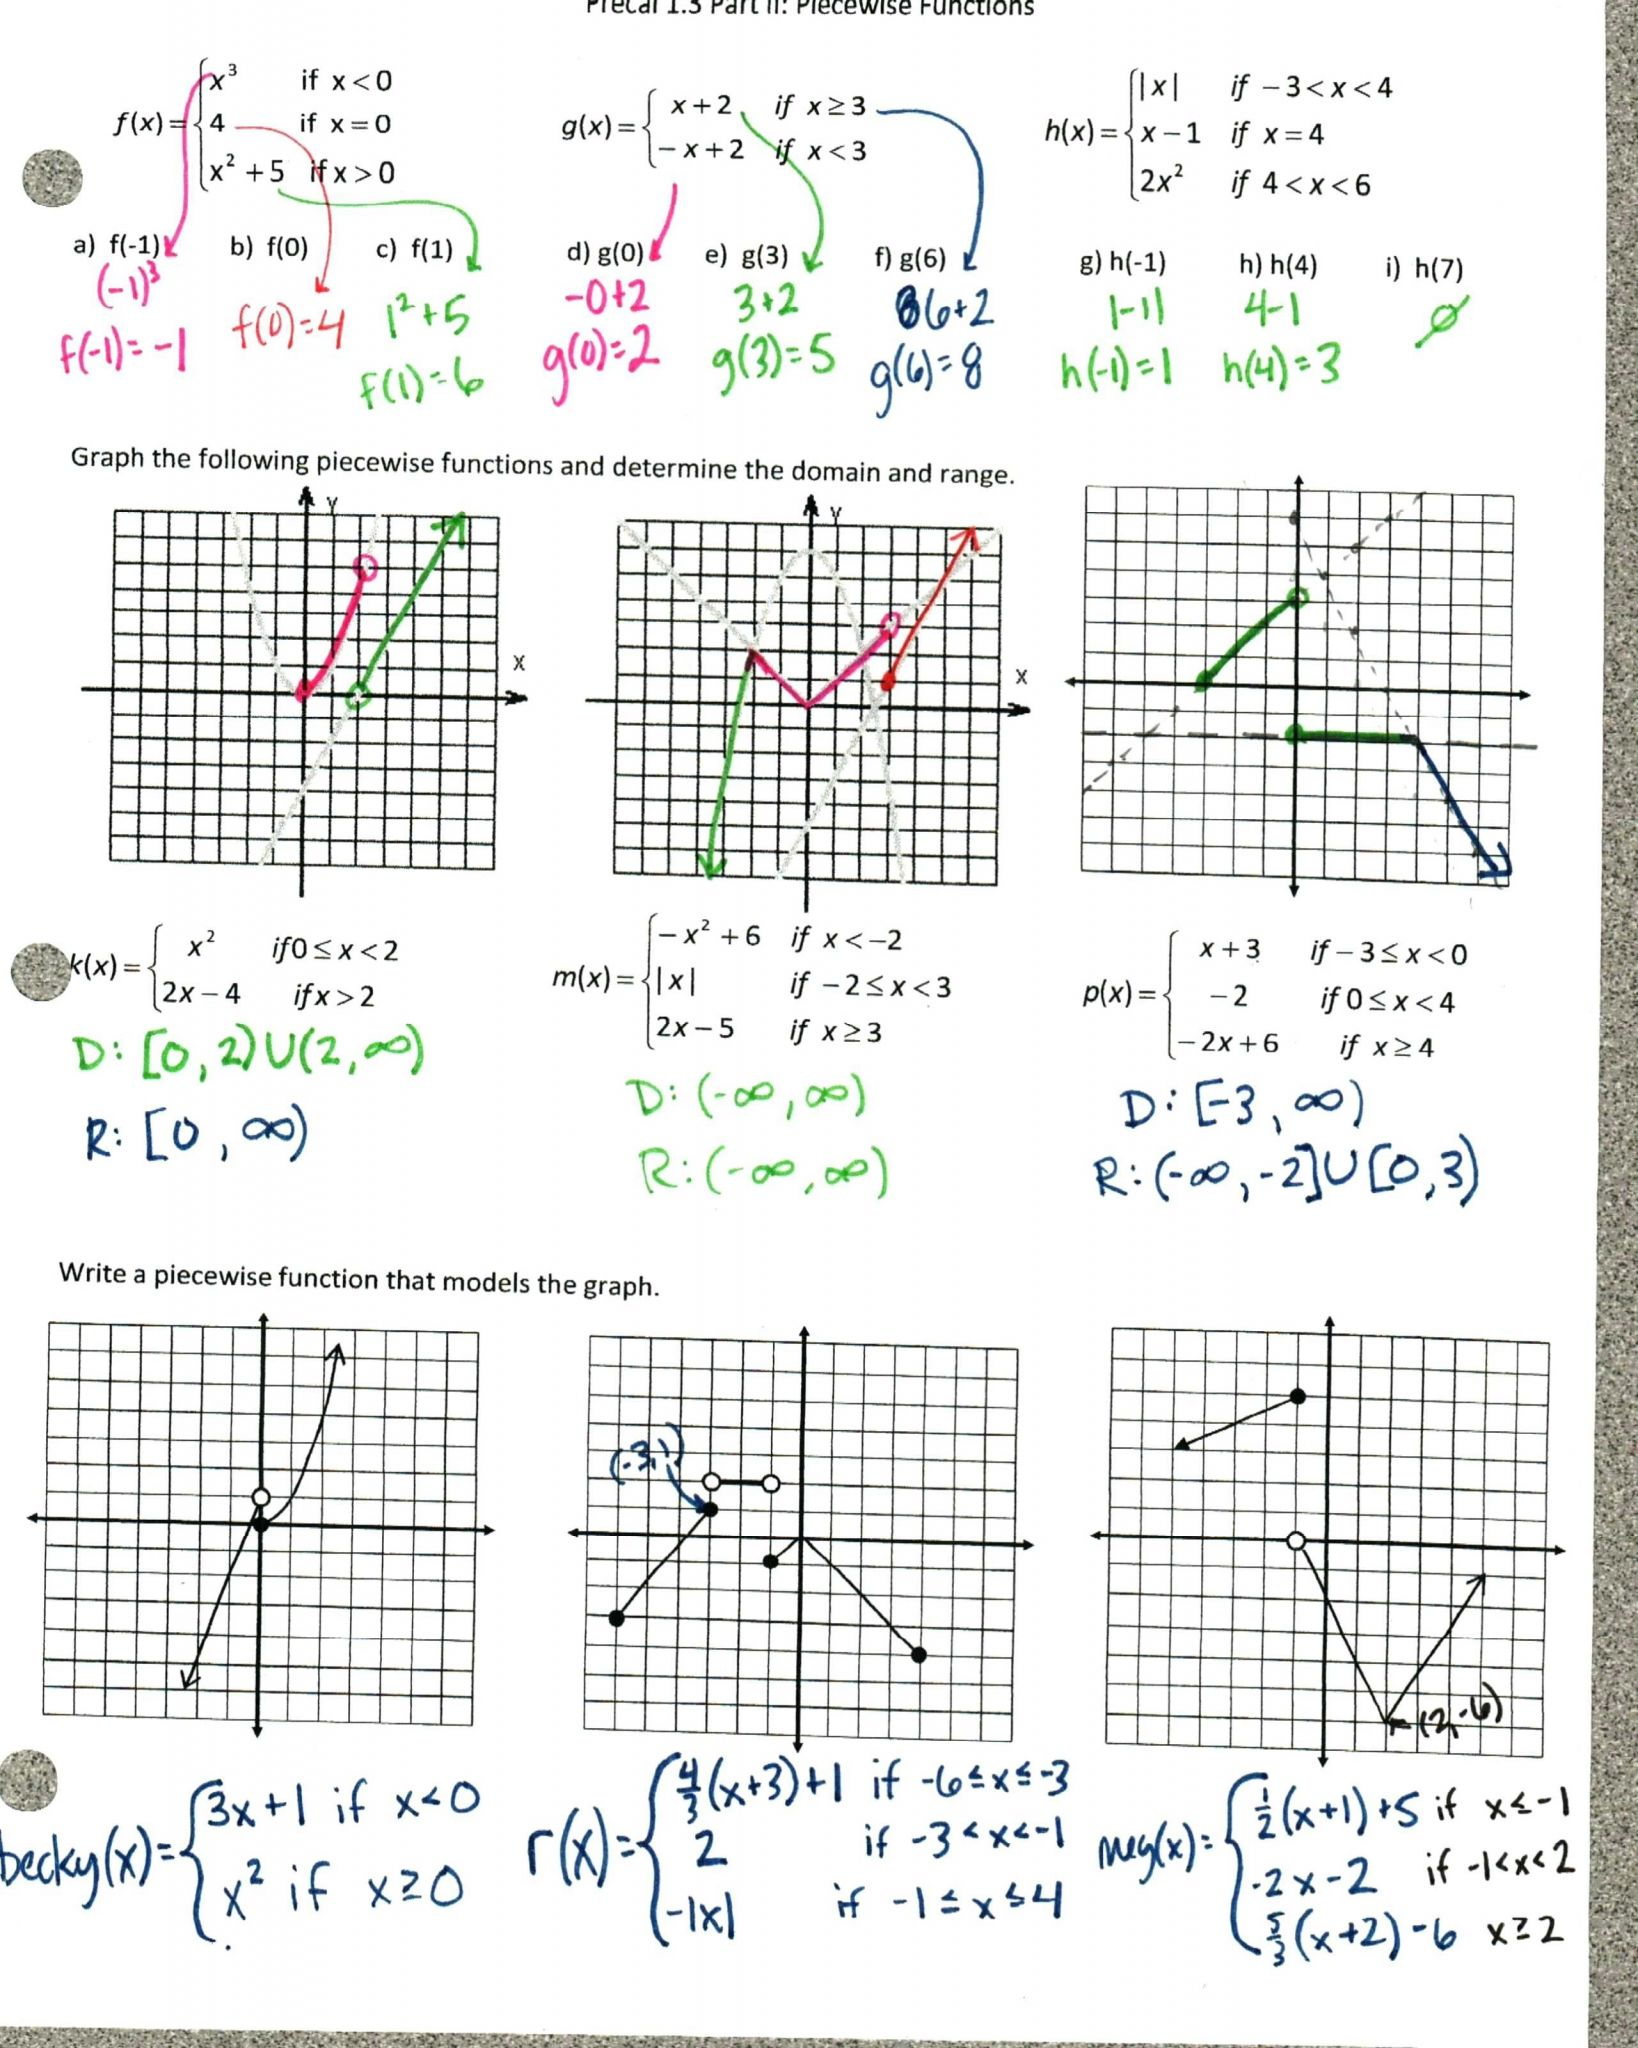 identifying-features-of-quadratic-functions-worksheet-answers